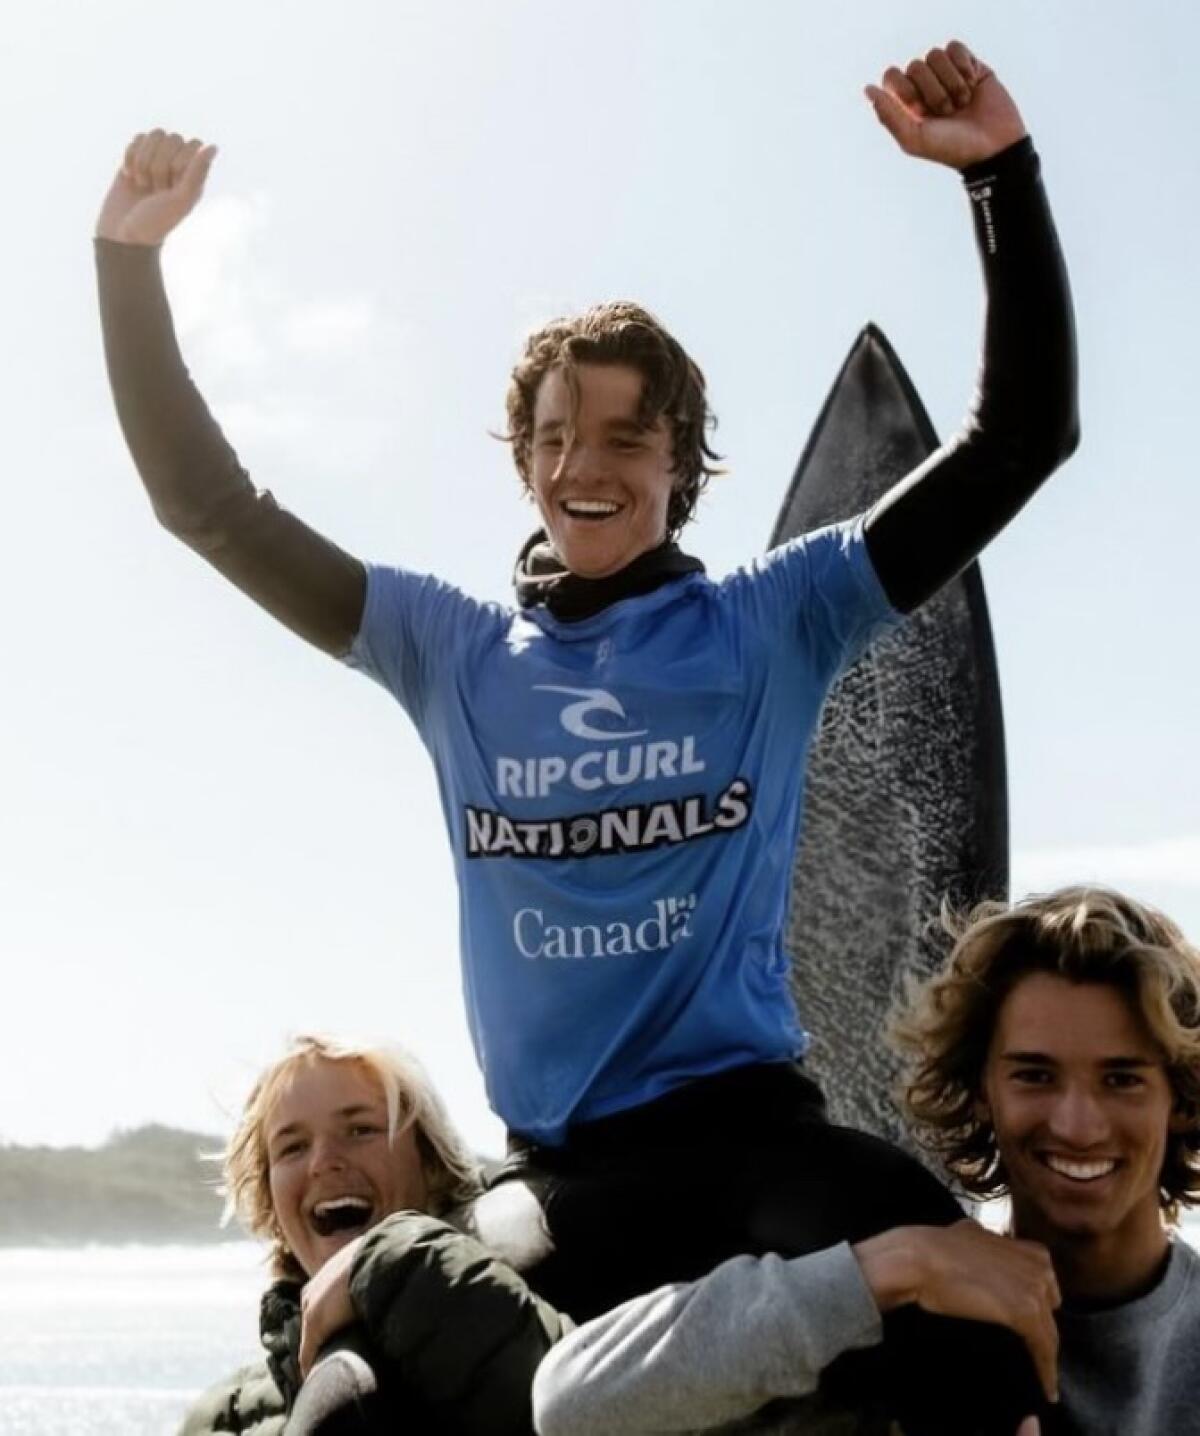 Moorpark resident and surfing star Jonas Meskis celebrates after a ride.